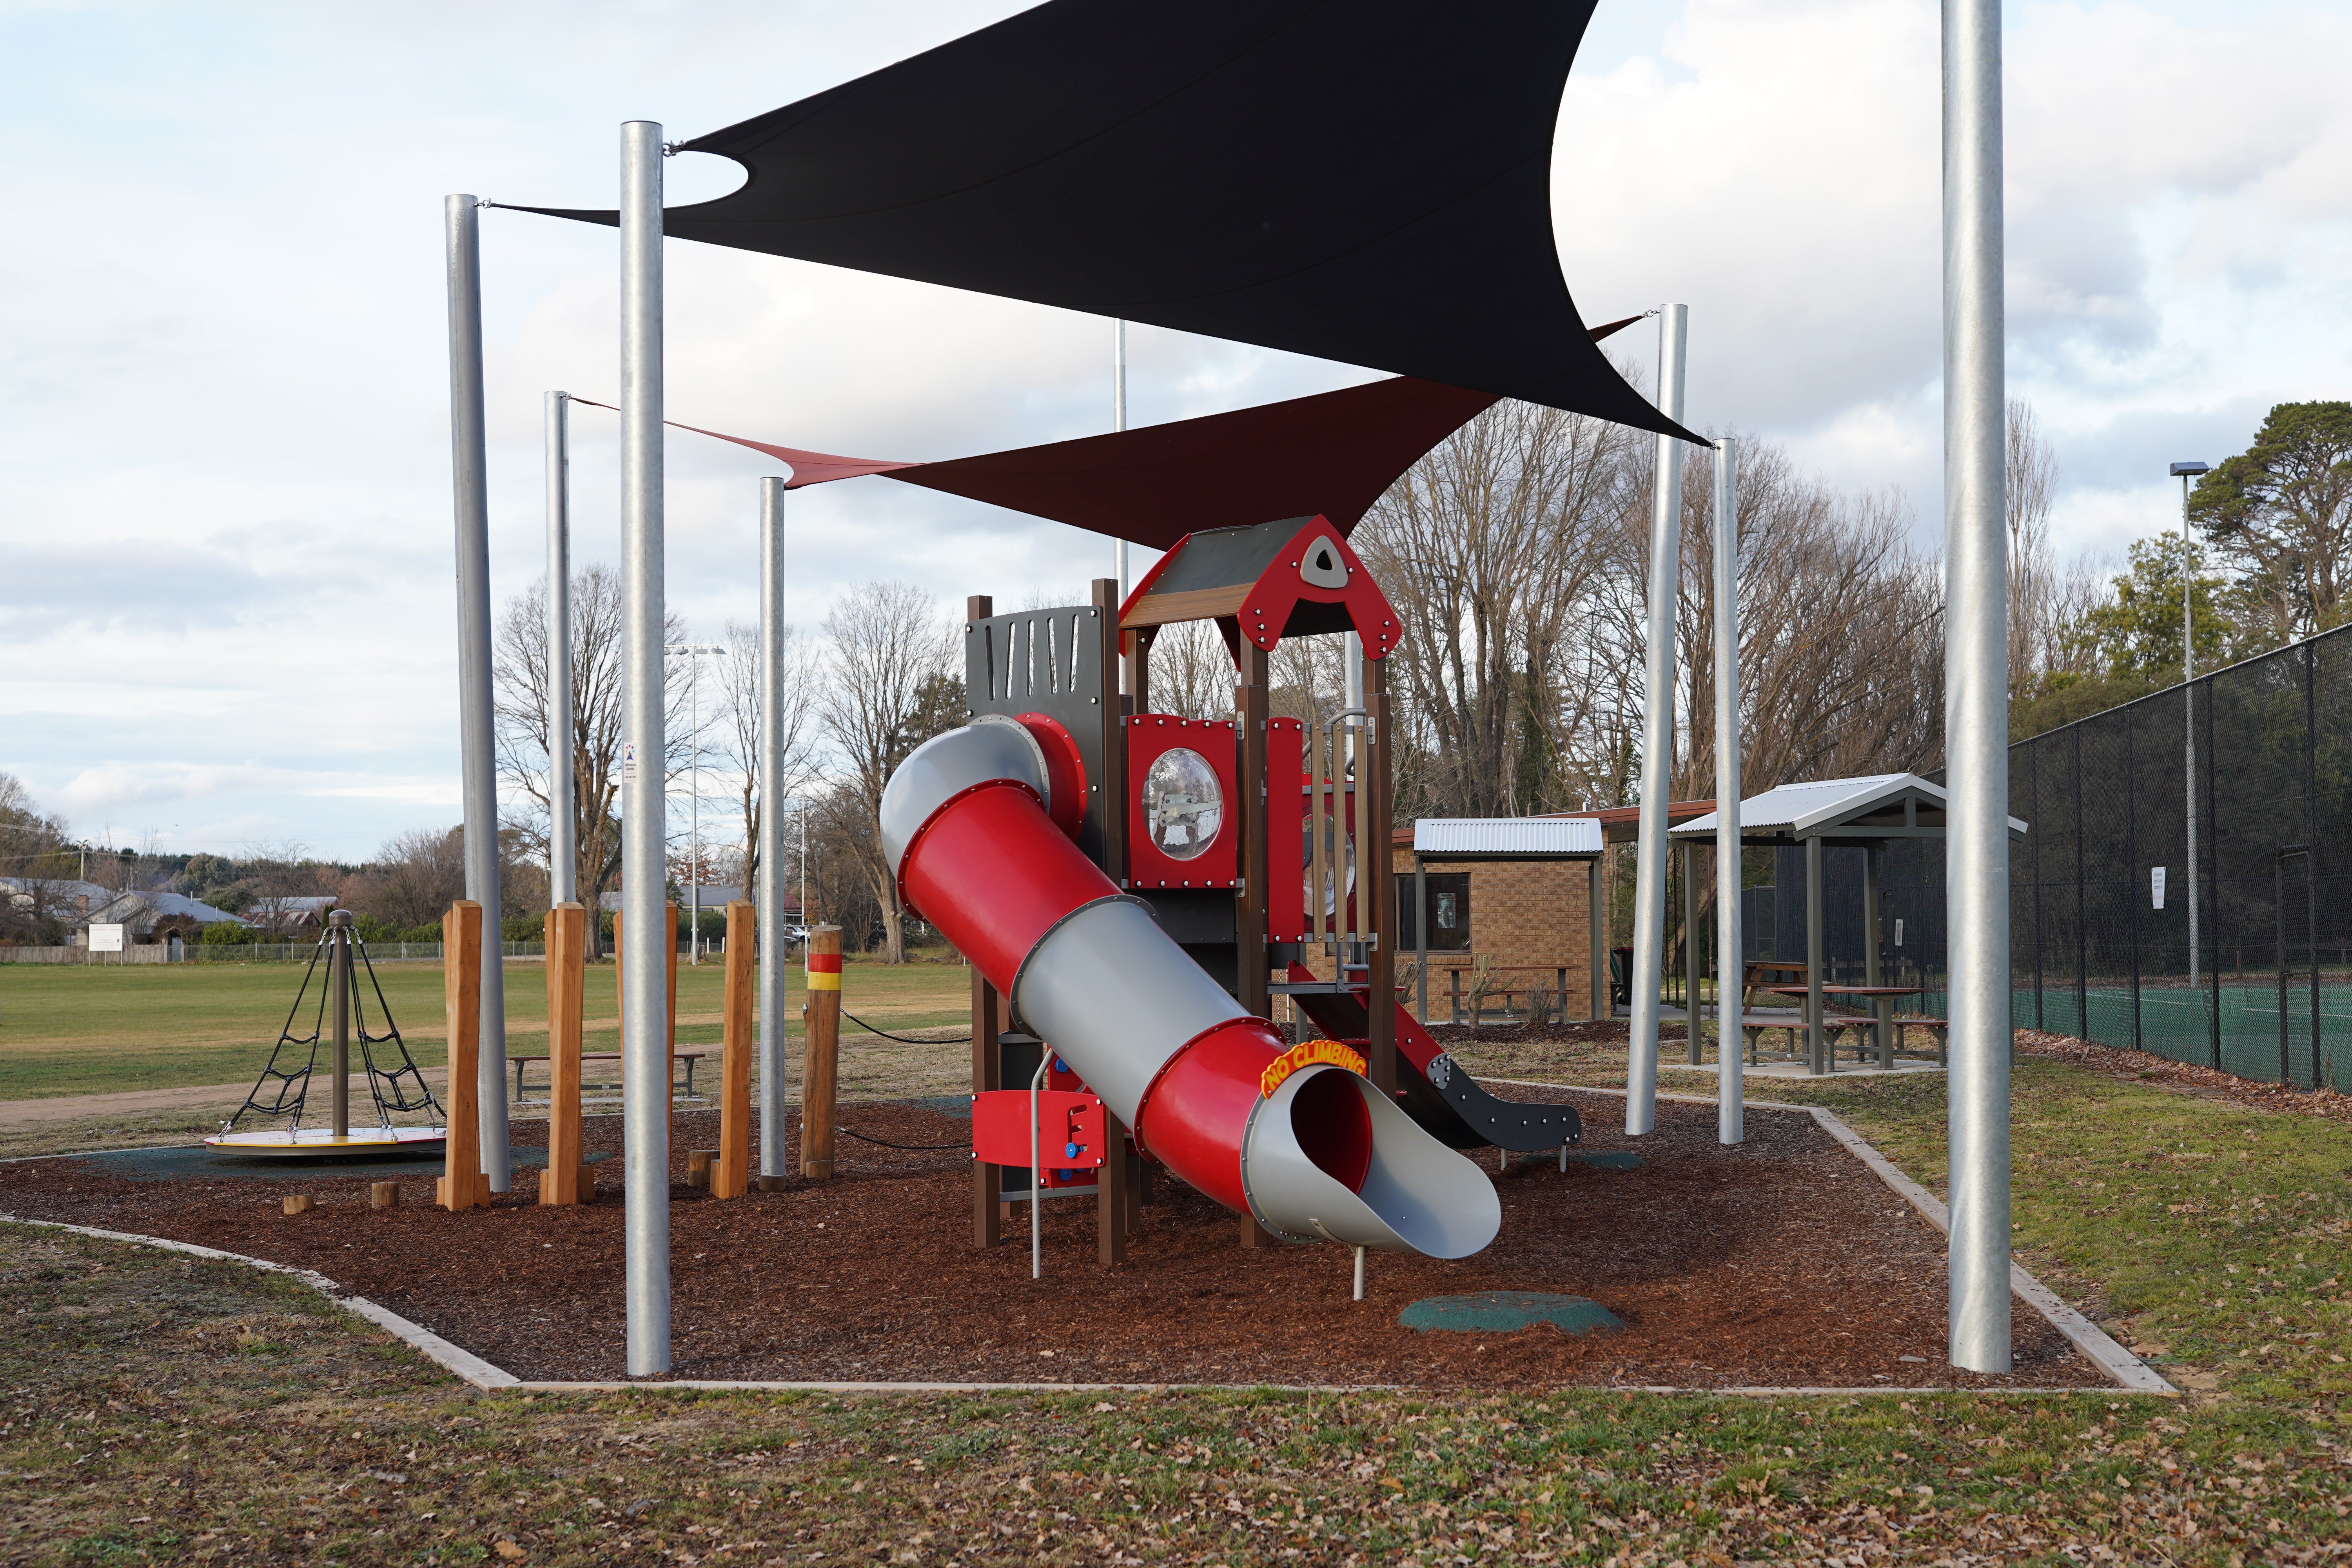 Braidwood Recreation Grounds and Playground - Redcliffe Tourism